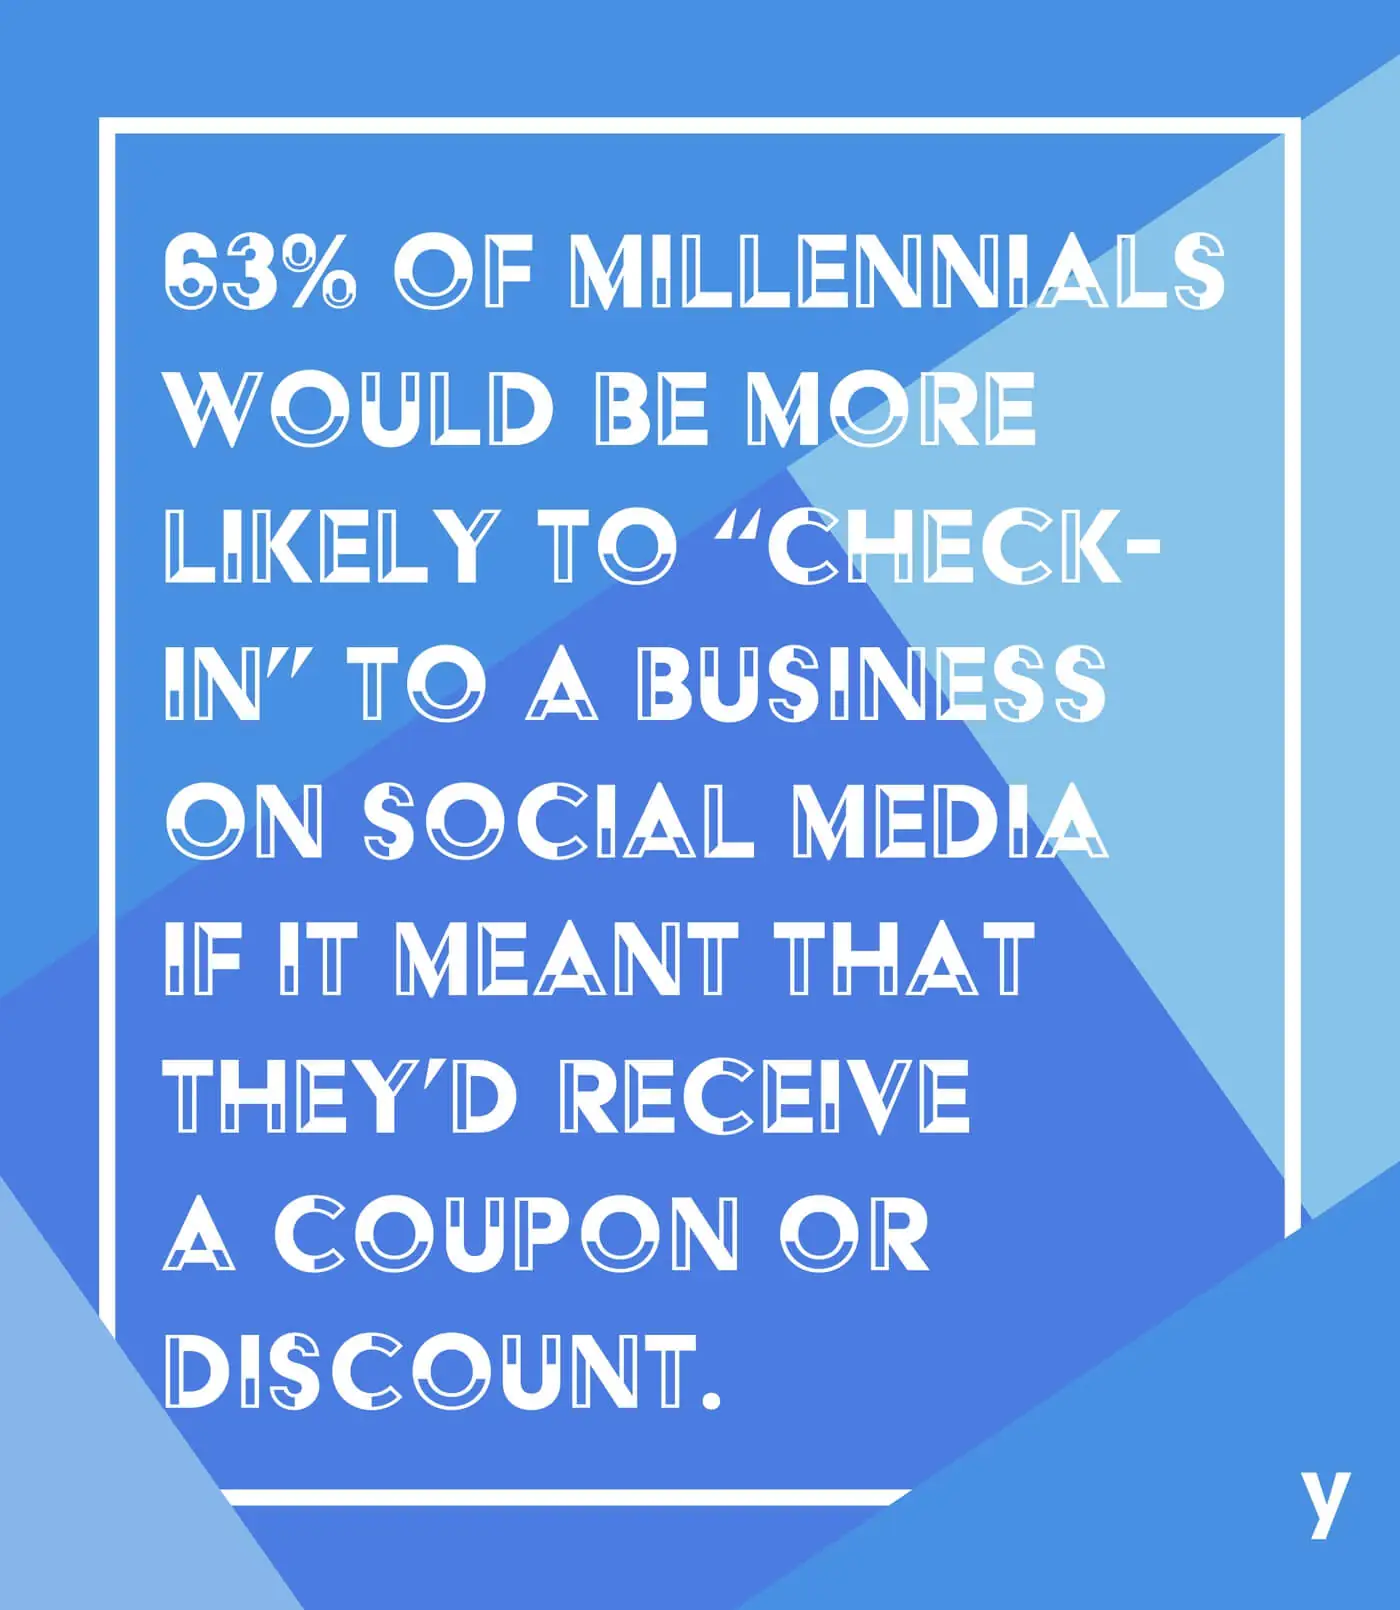 95% of millennials would be more likely to check it out if social business offers a coupon or discount.